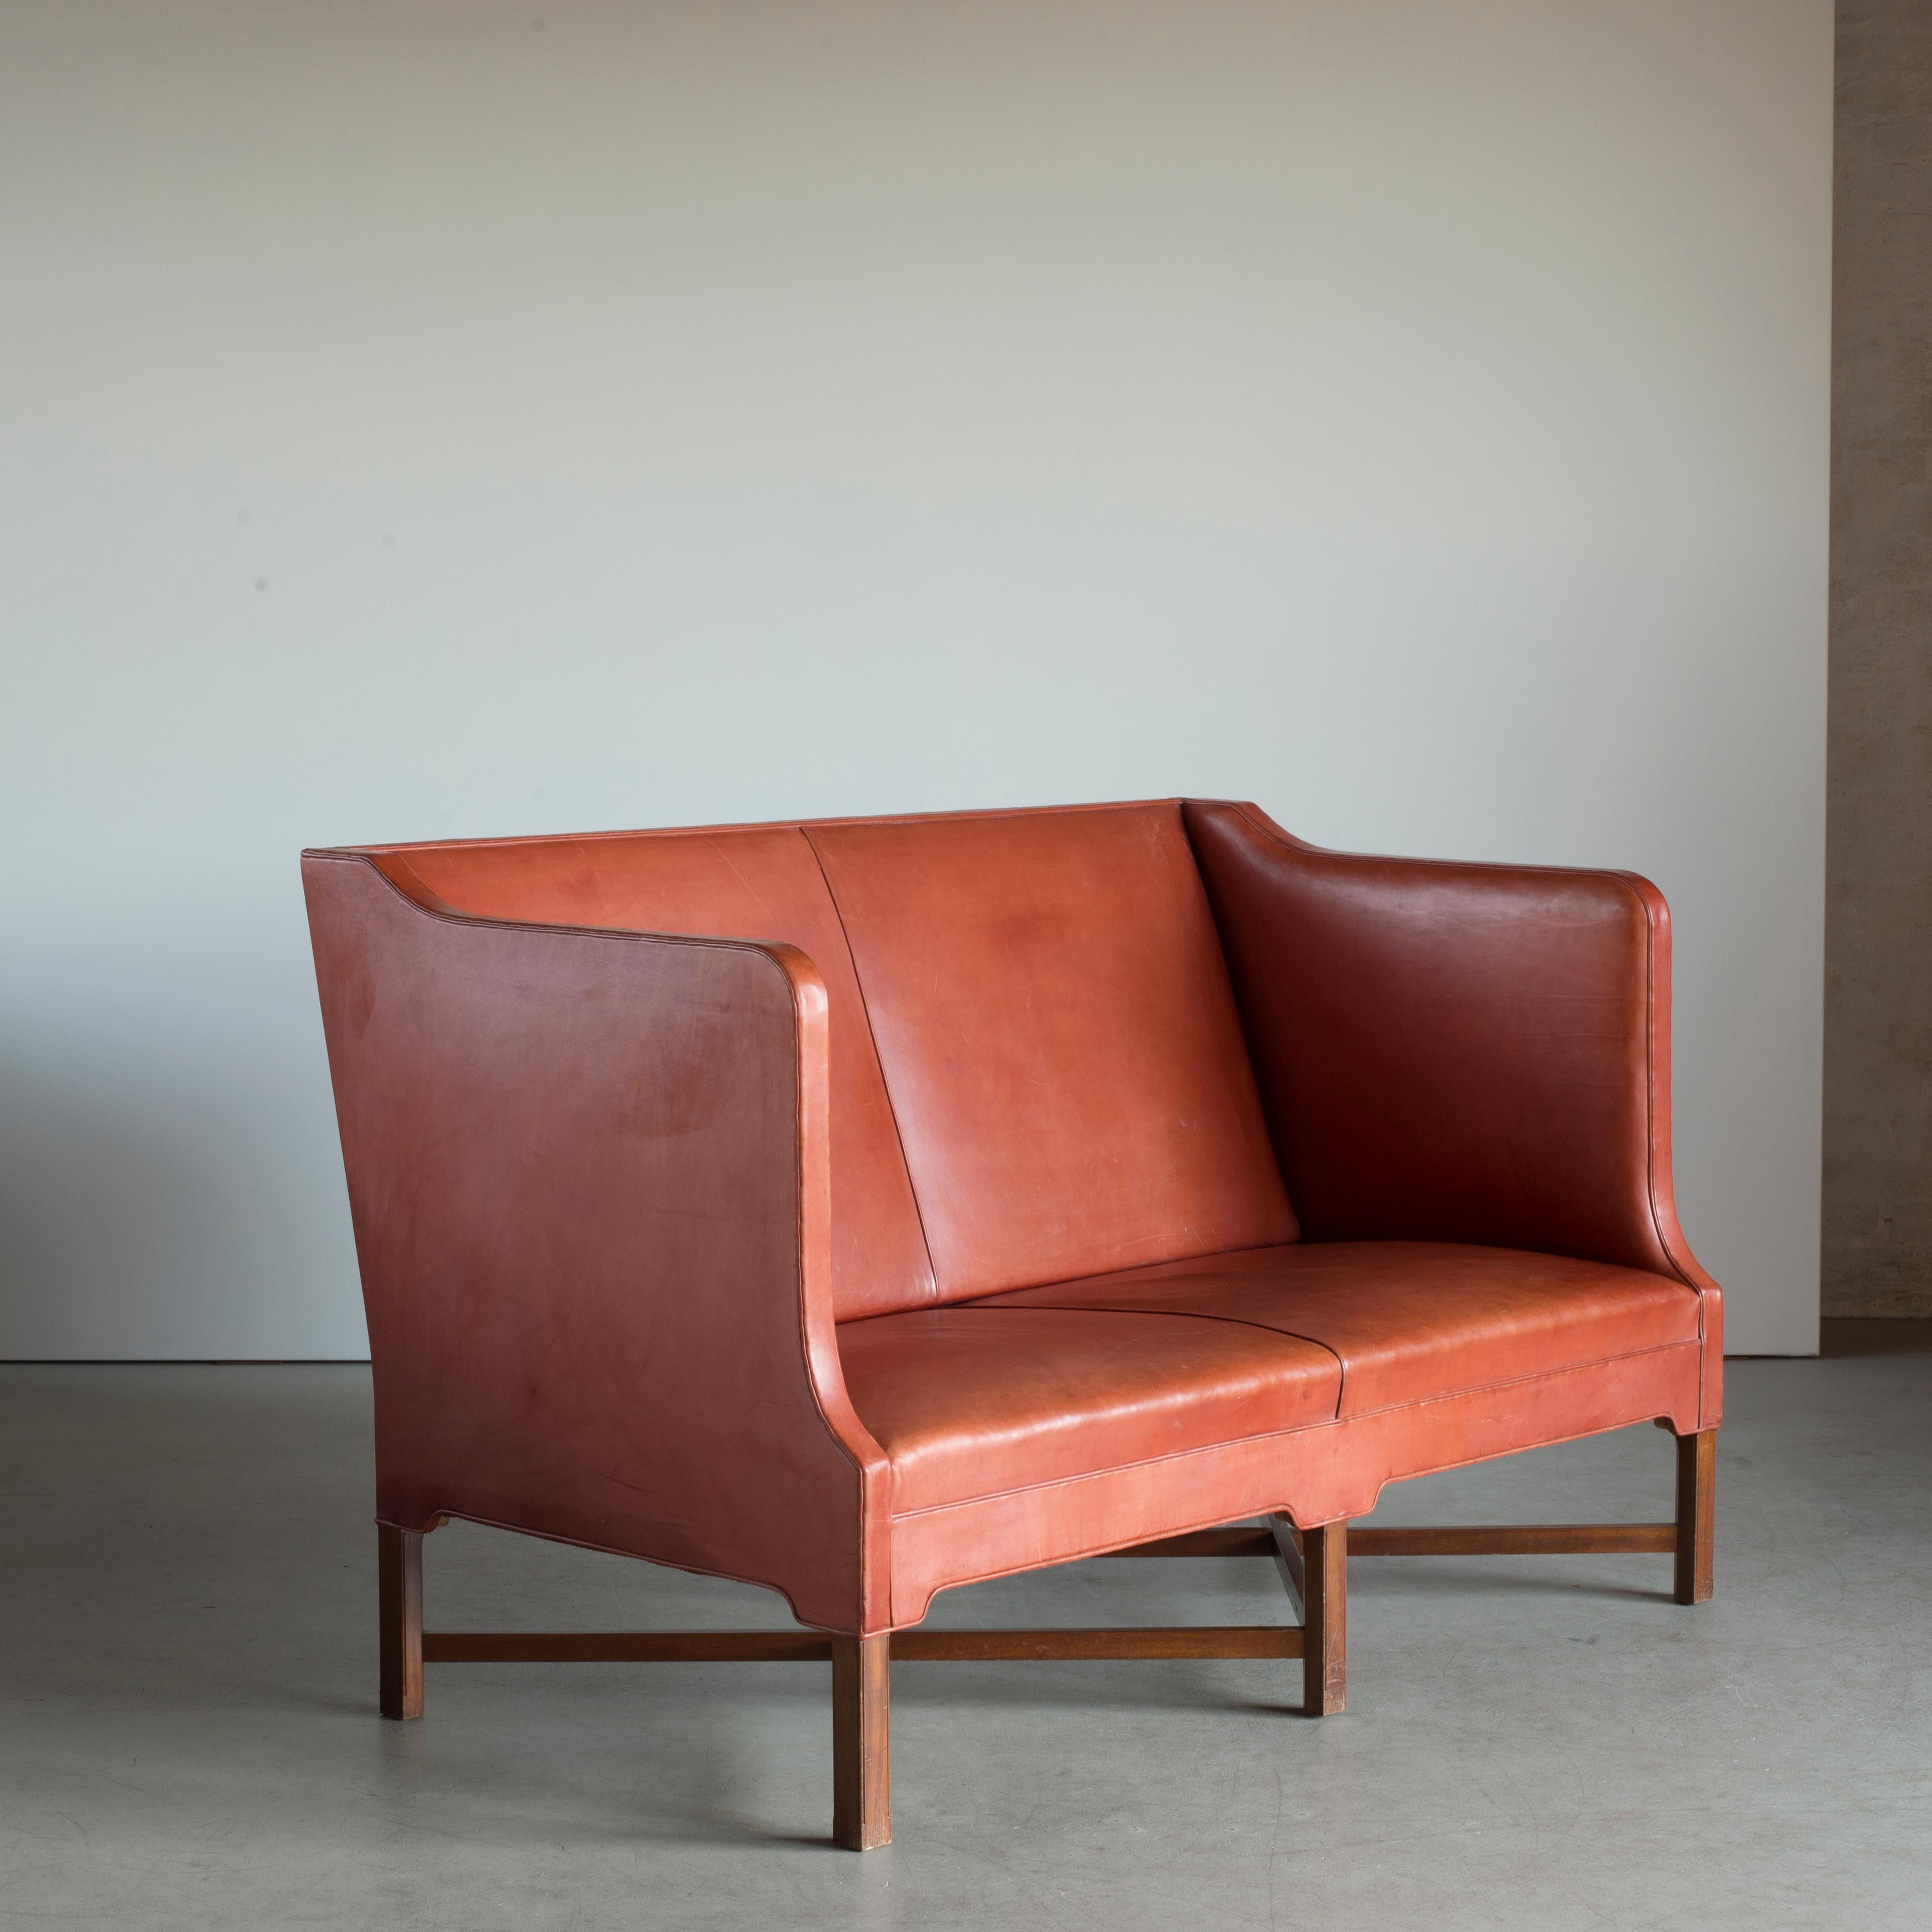 Kaare Klint freestanding two-seat sofa on six-legged, profiled mahogany cross-frame. Sides, seat and back upholstered with patinated leather. Executed by Rud. Rasmussen, Copenhagen.

Reverse with paper labels ‘RUD.